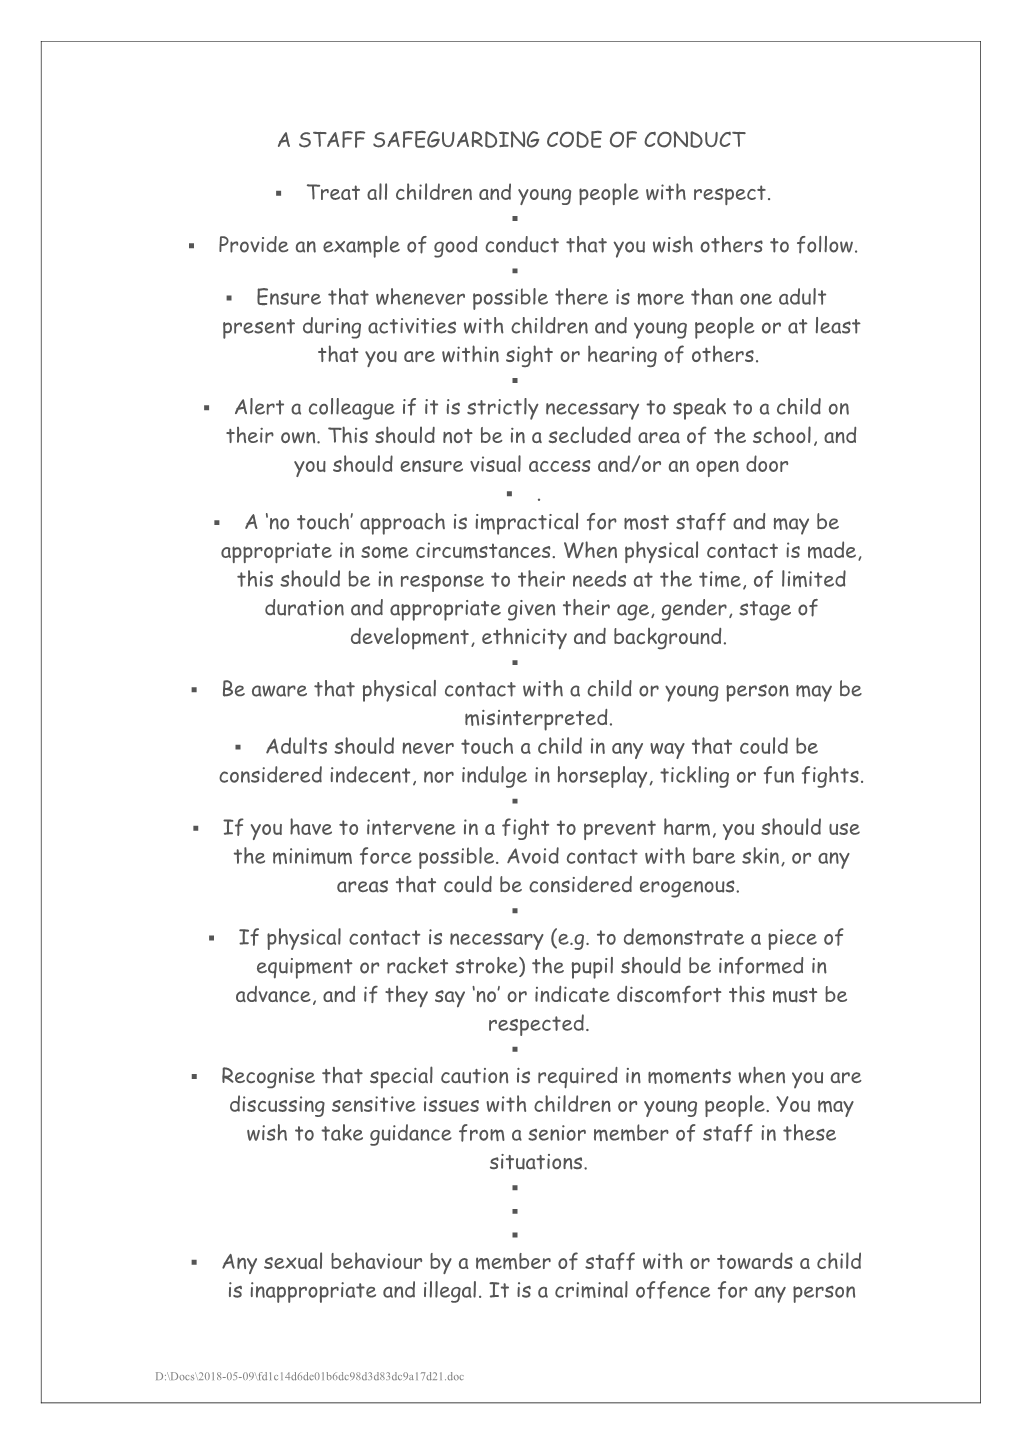 A Staff Code of Conduct